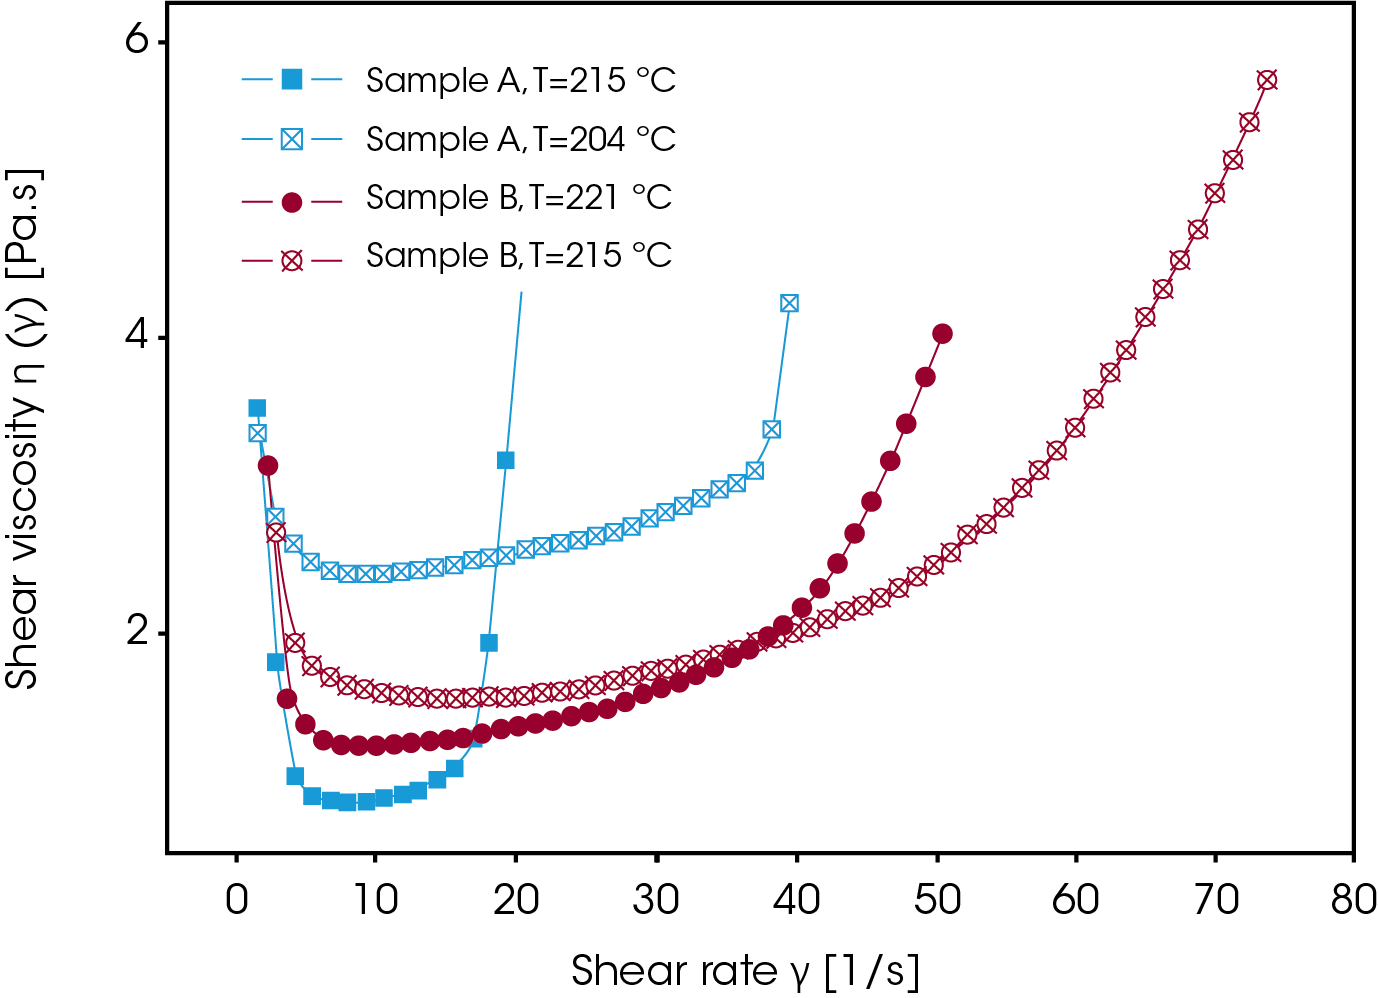 Figure 12. PVC melt stability followed in oscillation for sample A and B at different temperatures.